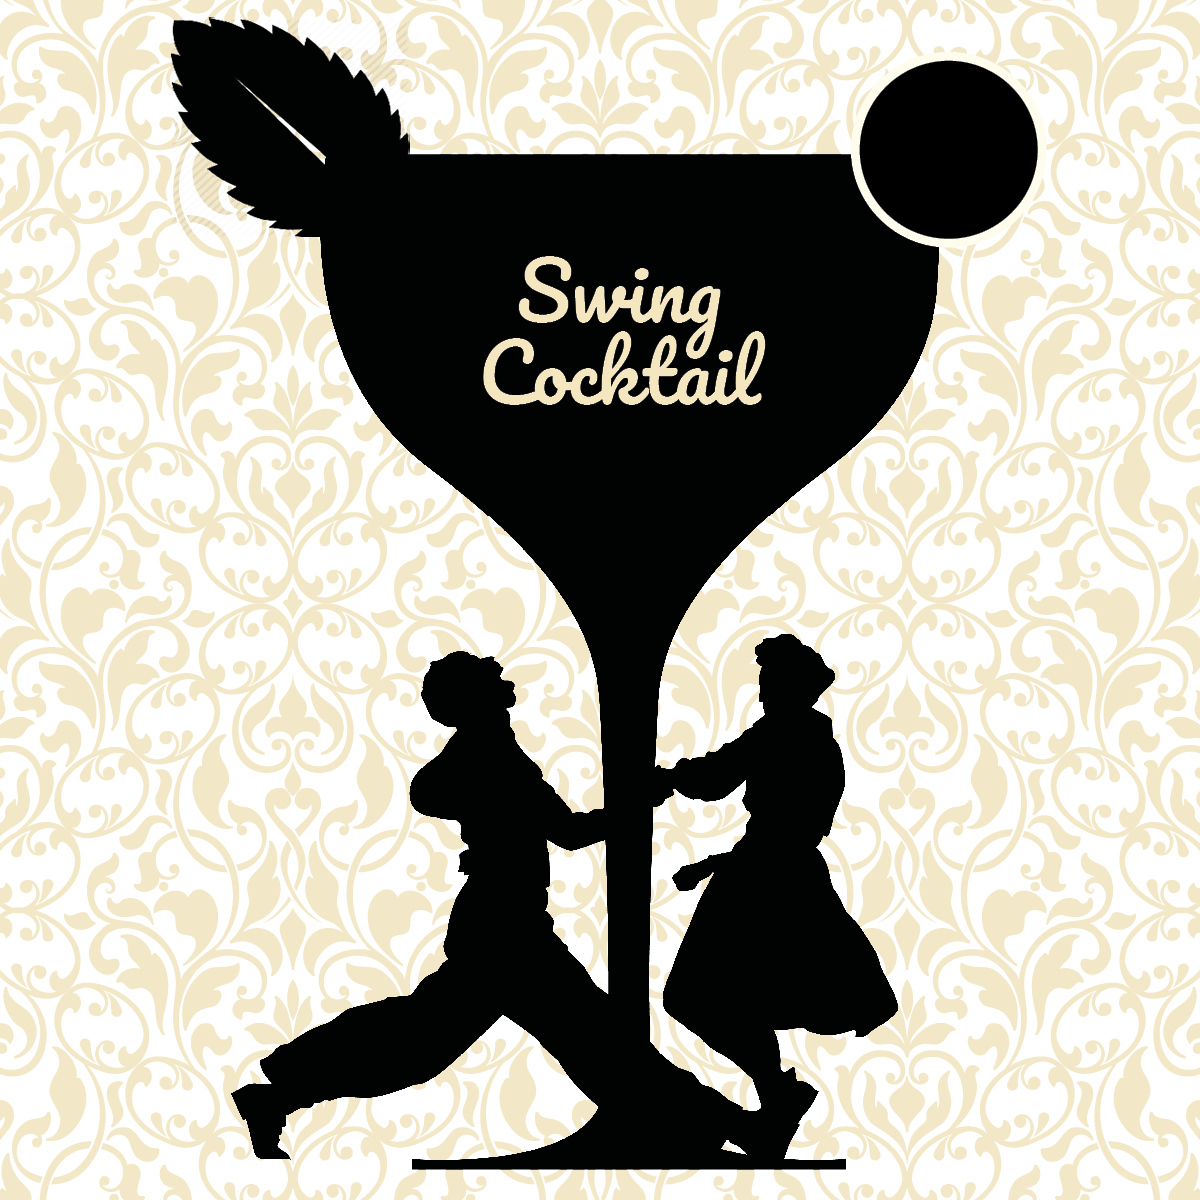 # SWING COCKTAIL #